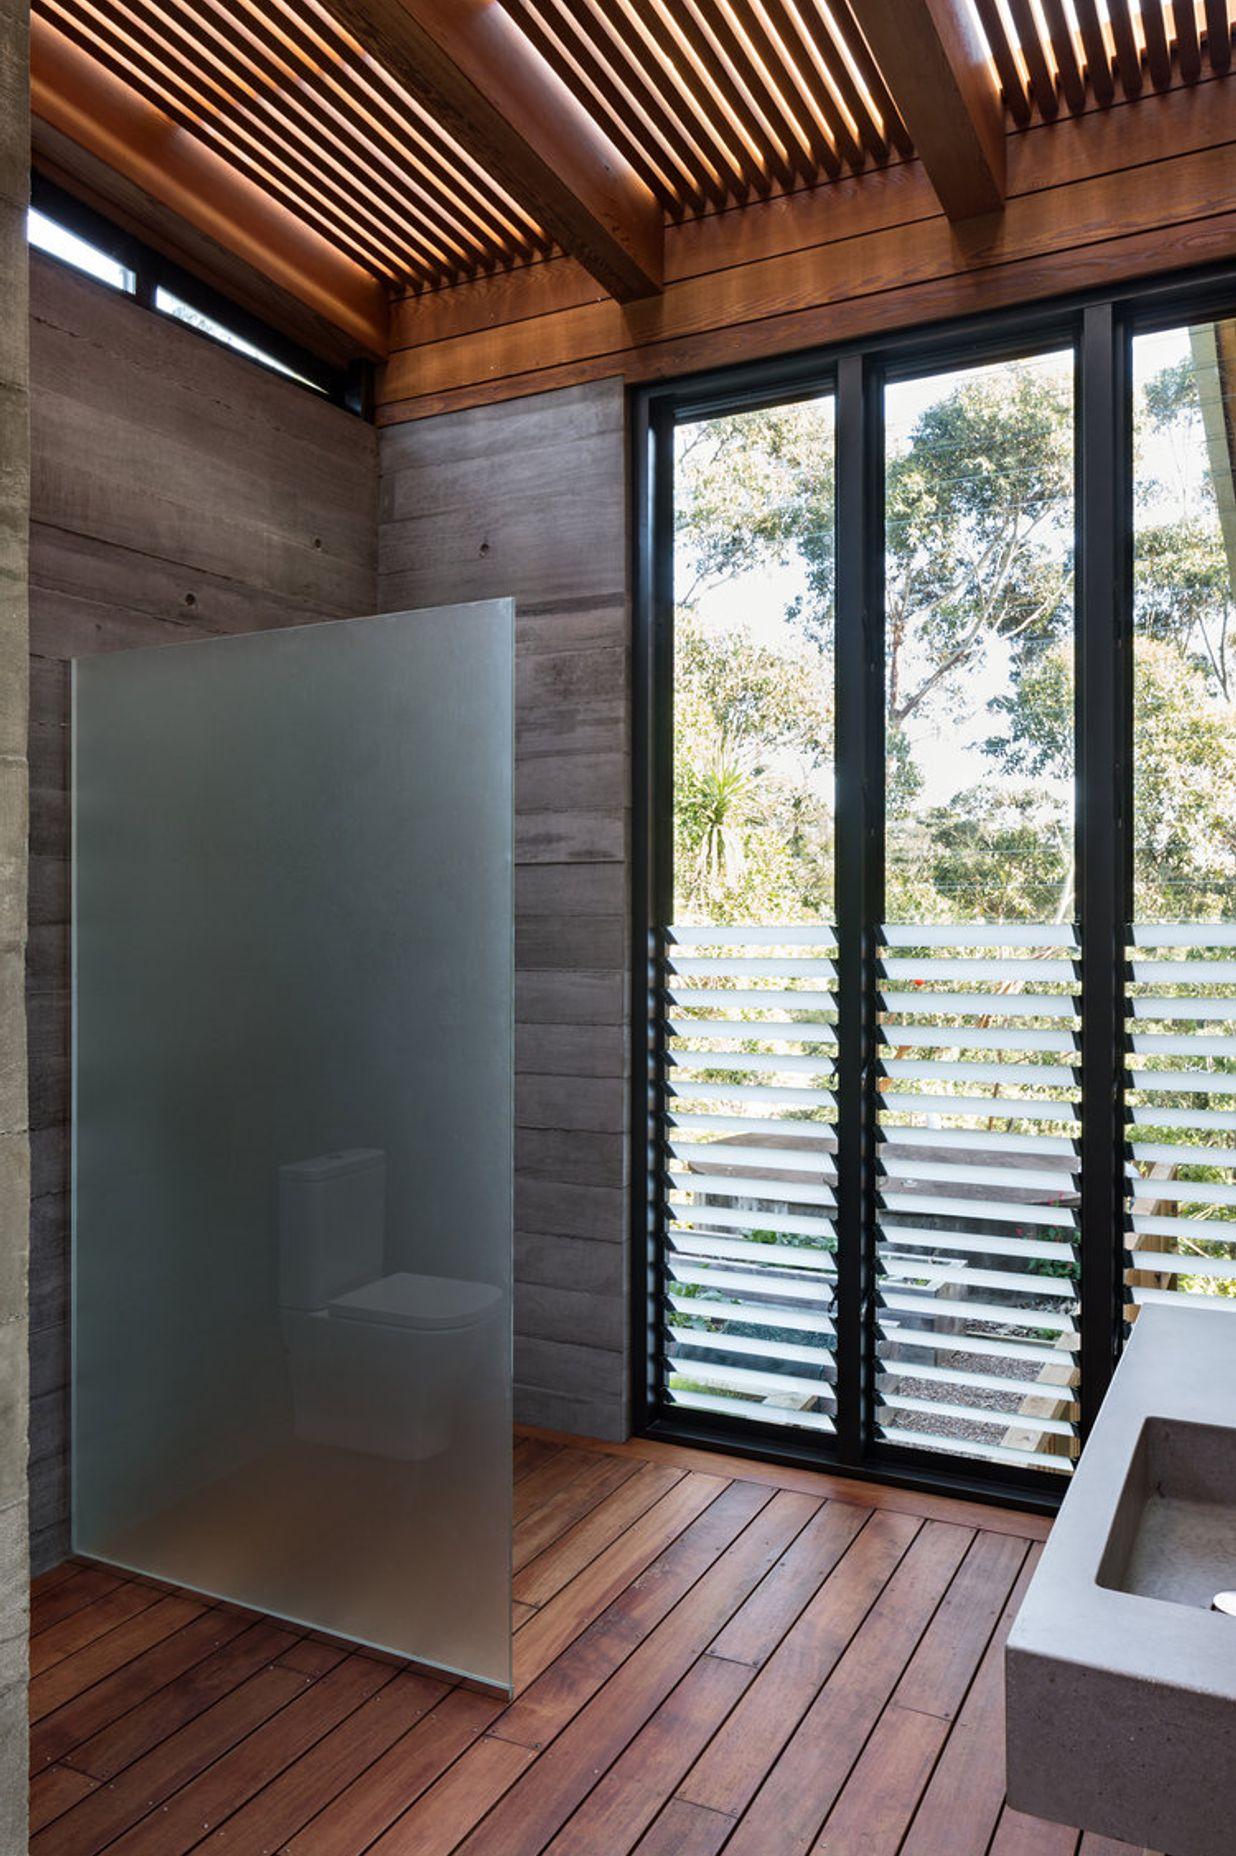 A robust bathroom features decked flooring and slatted timber ceiling.